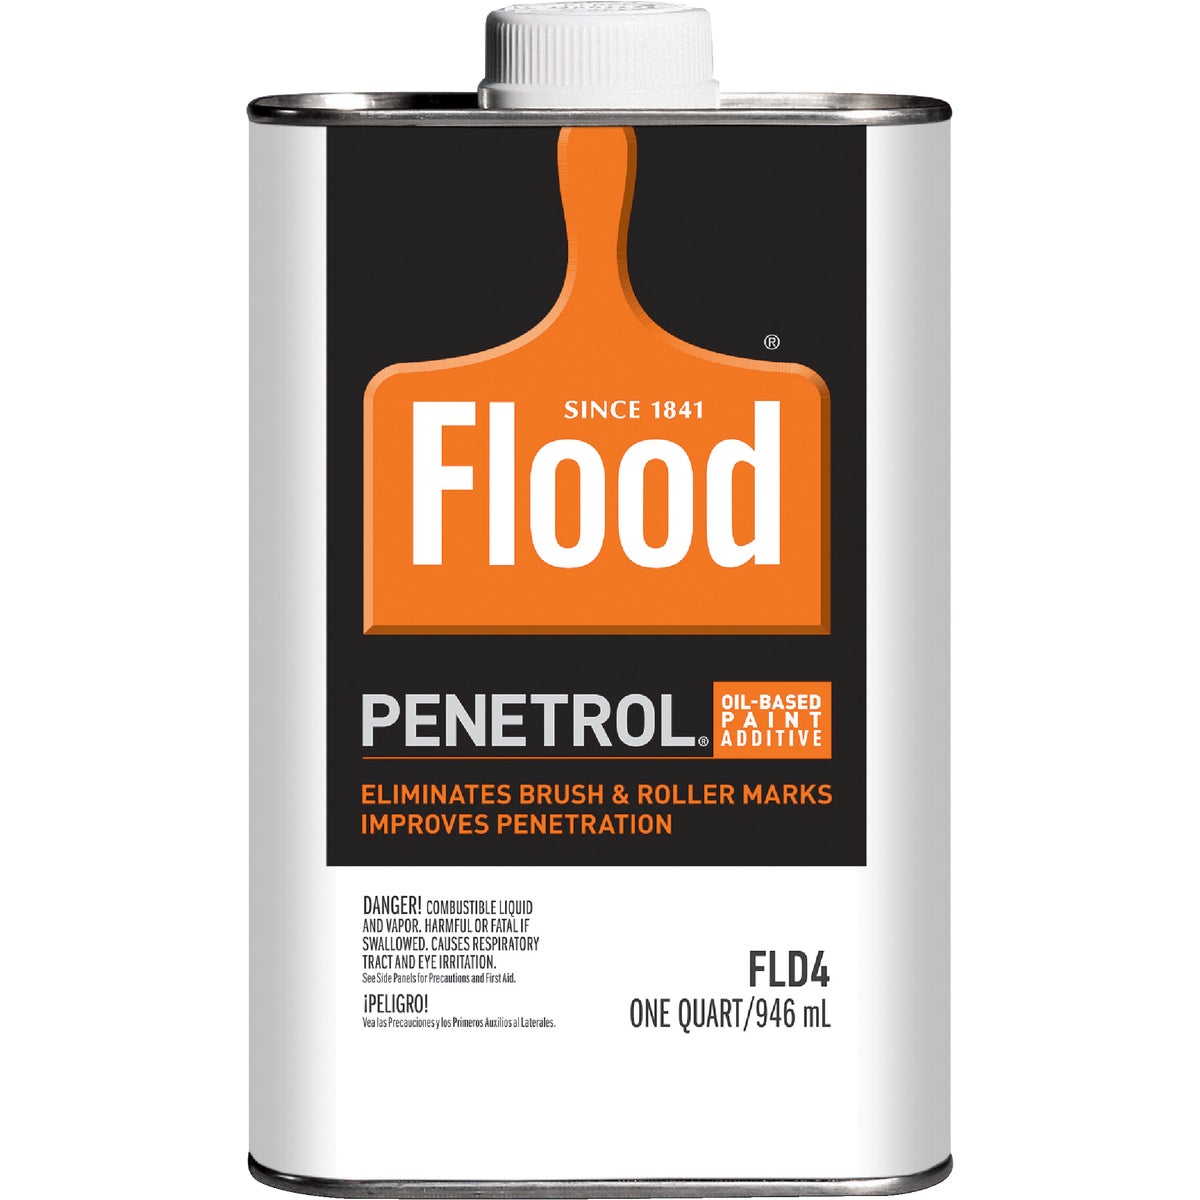 Item 770809, Add Penetrol to oil-based (alkyd) paints or varnish to improve flow and 